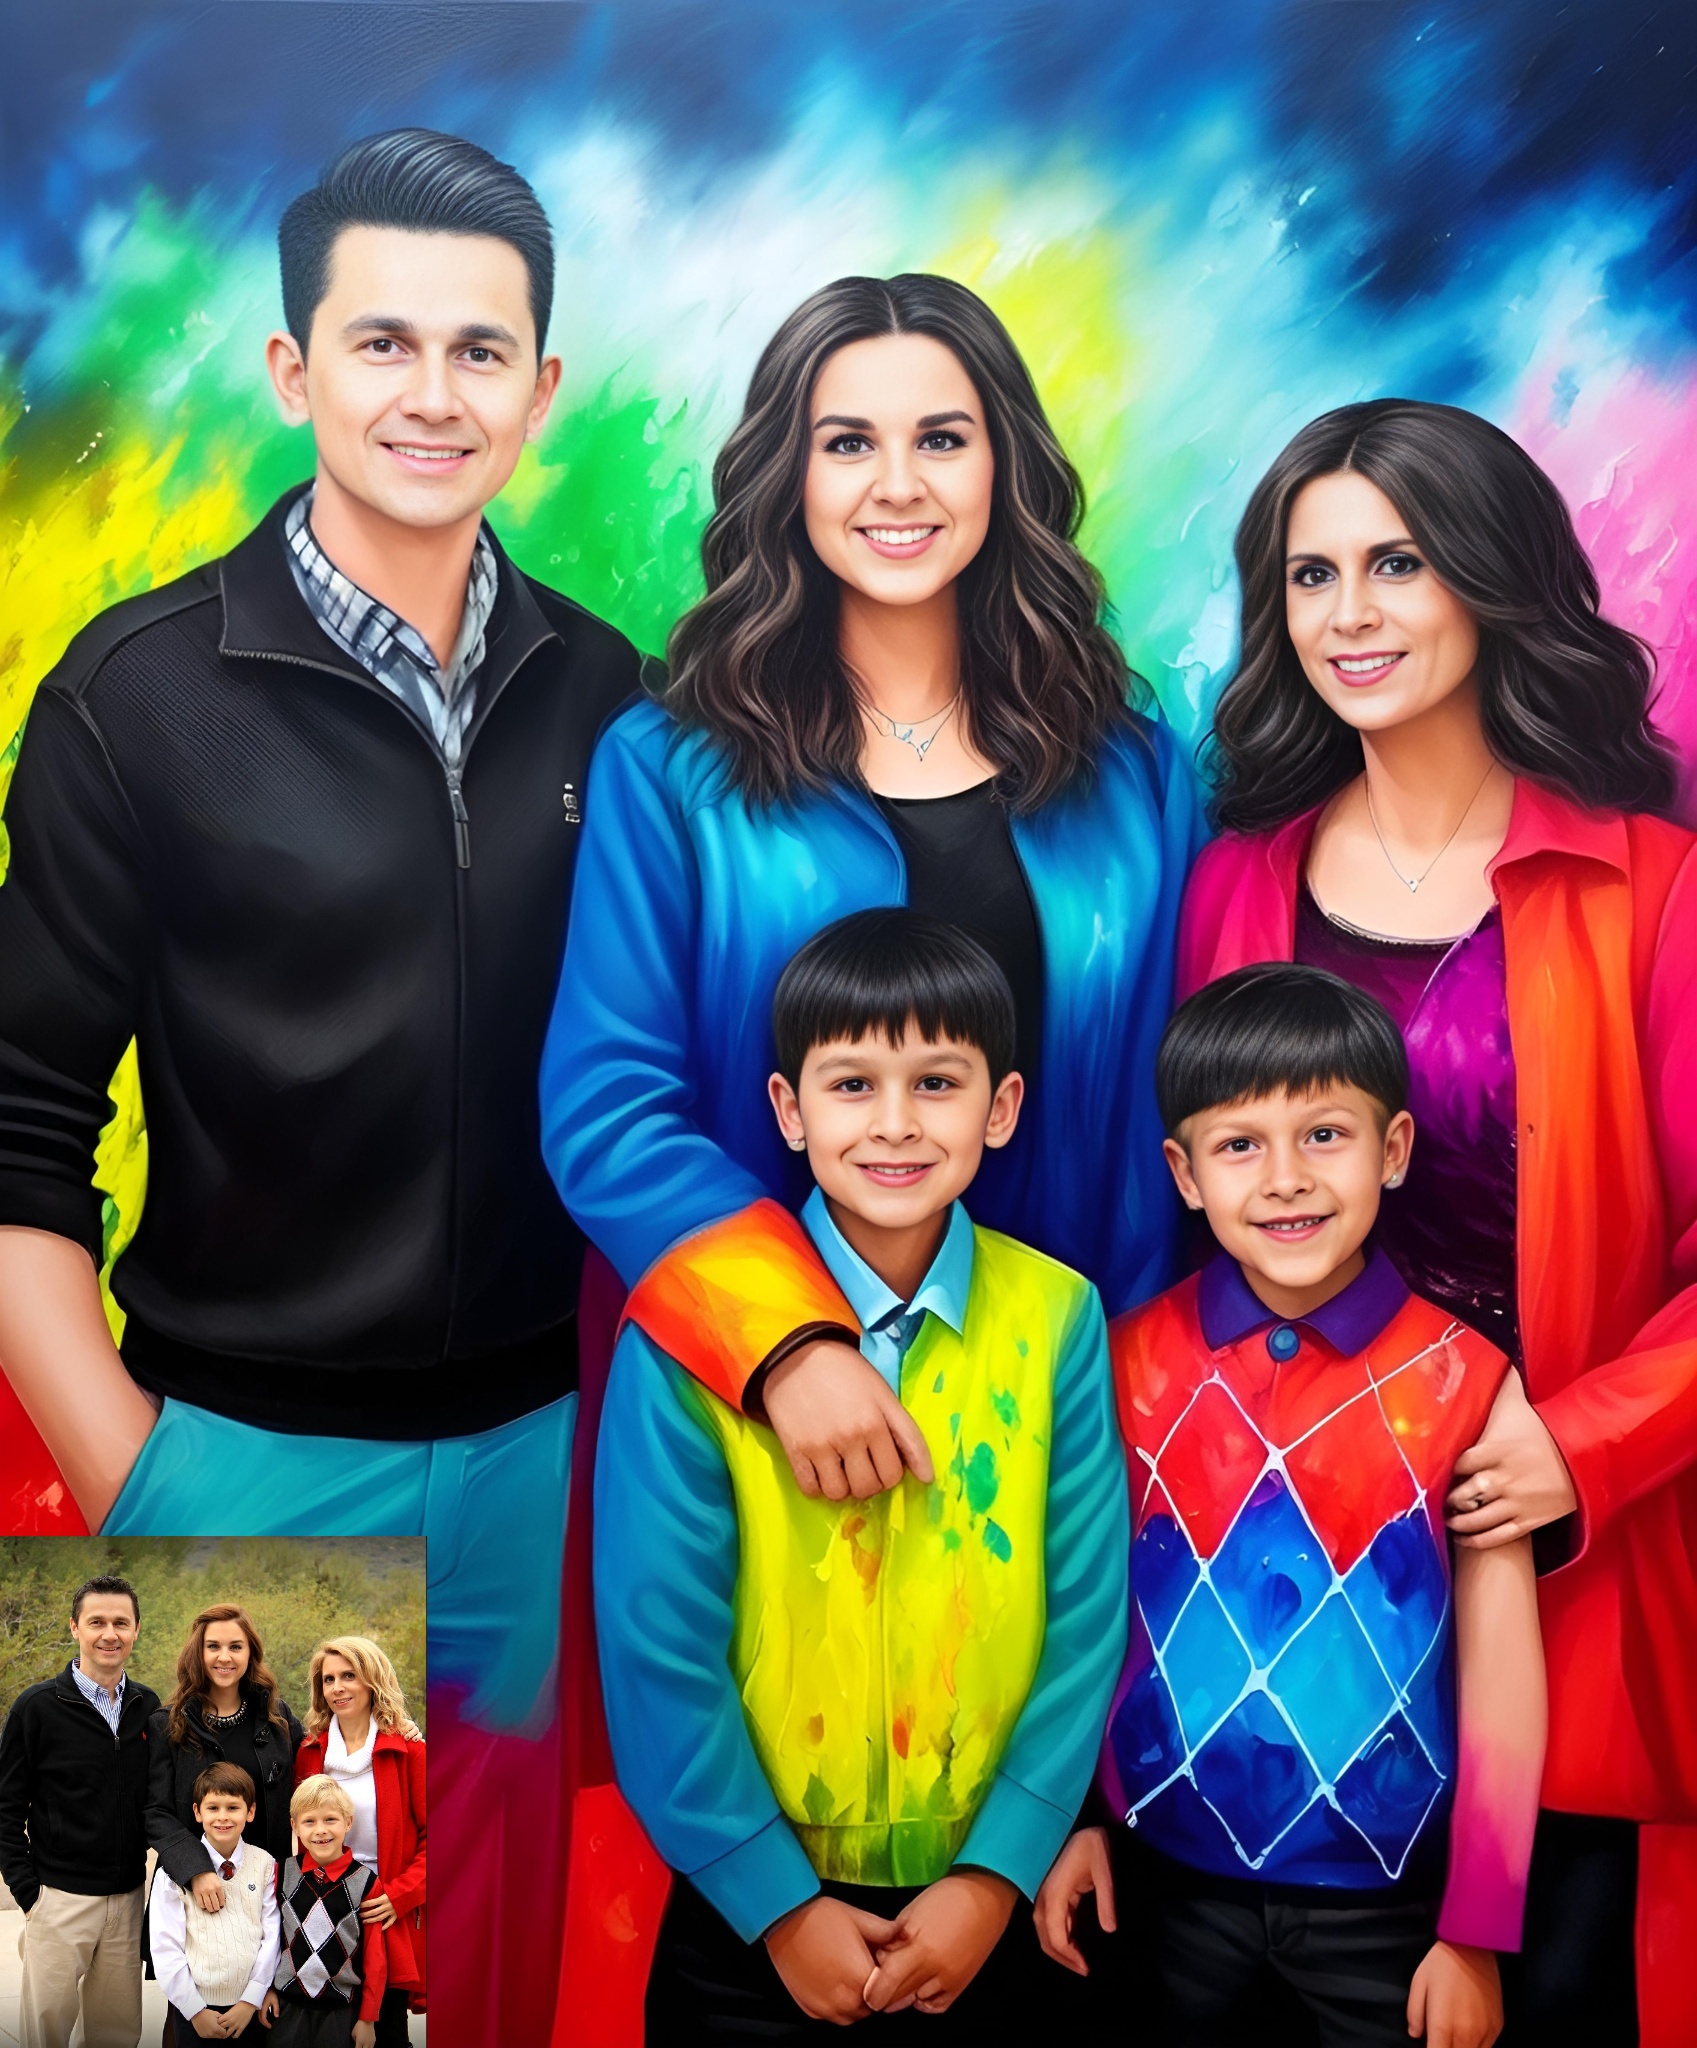 Vibrant Artistic Touch to Family Photo